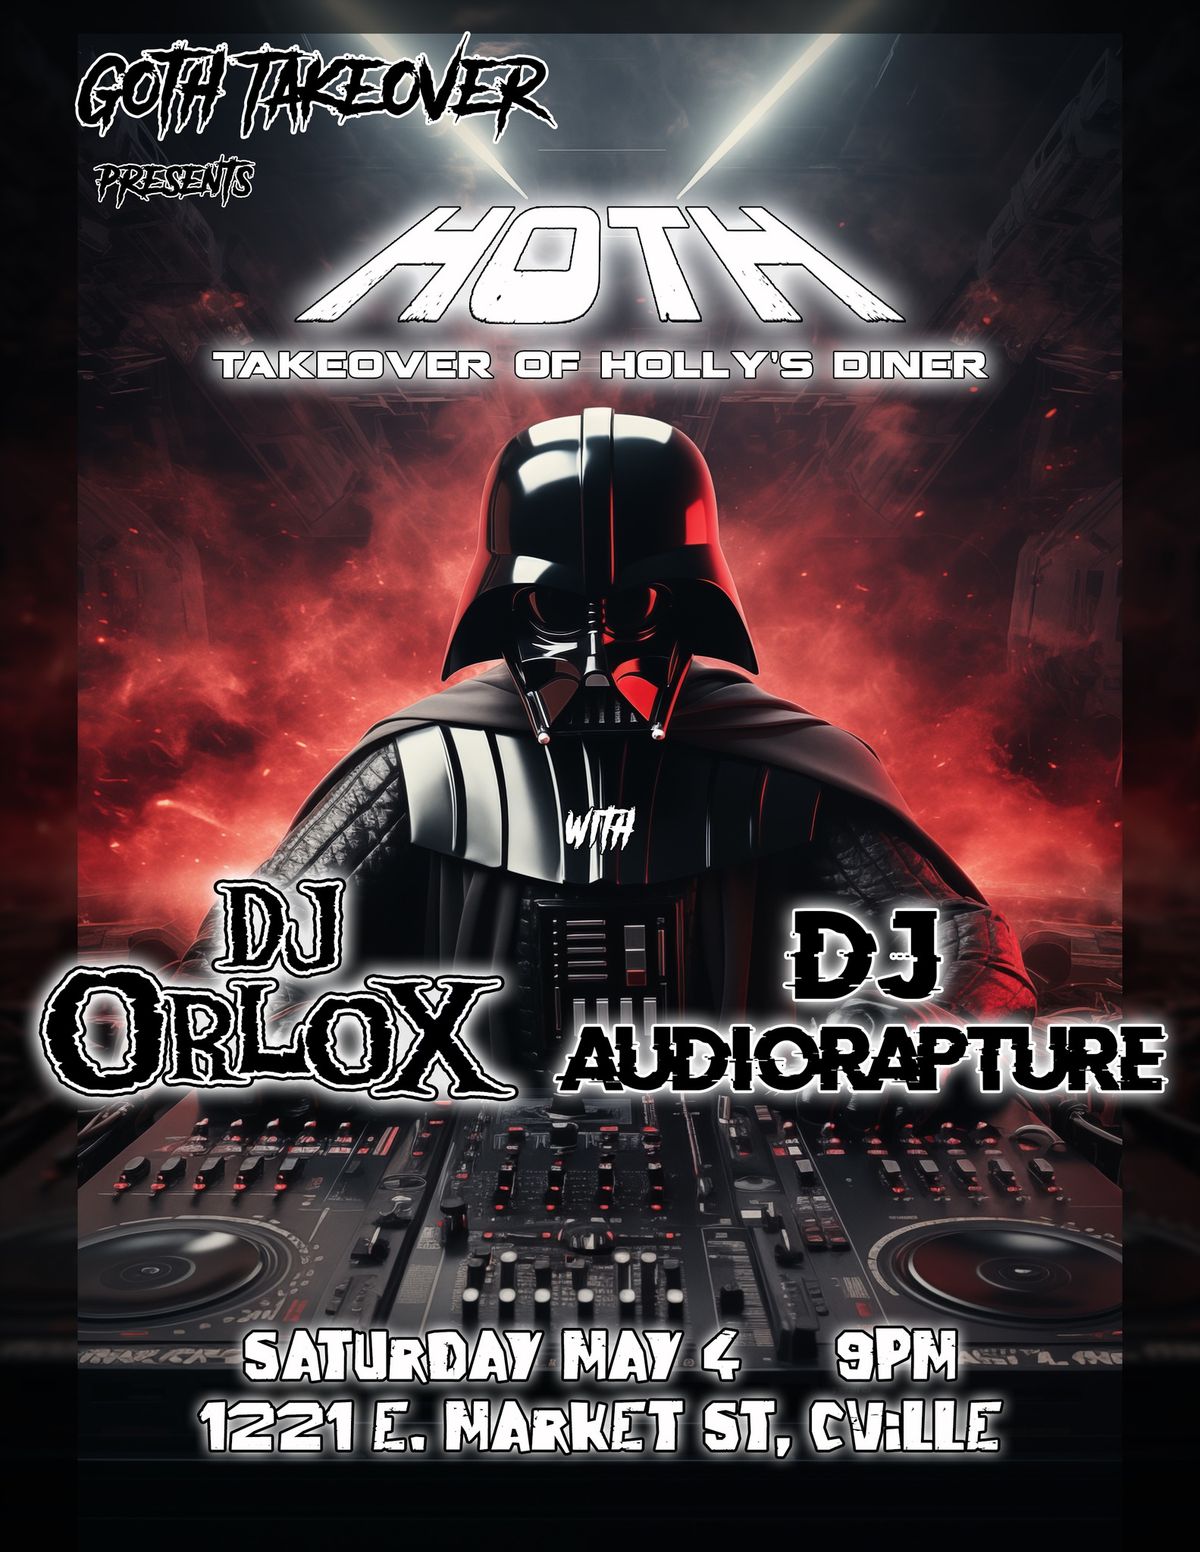 Goth Takeover presents HOTH TAKEOVER OF HOLLY'S DINER! A Star Wars and Sci-Fi Celebration!